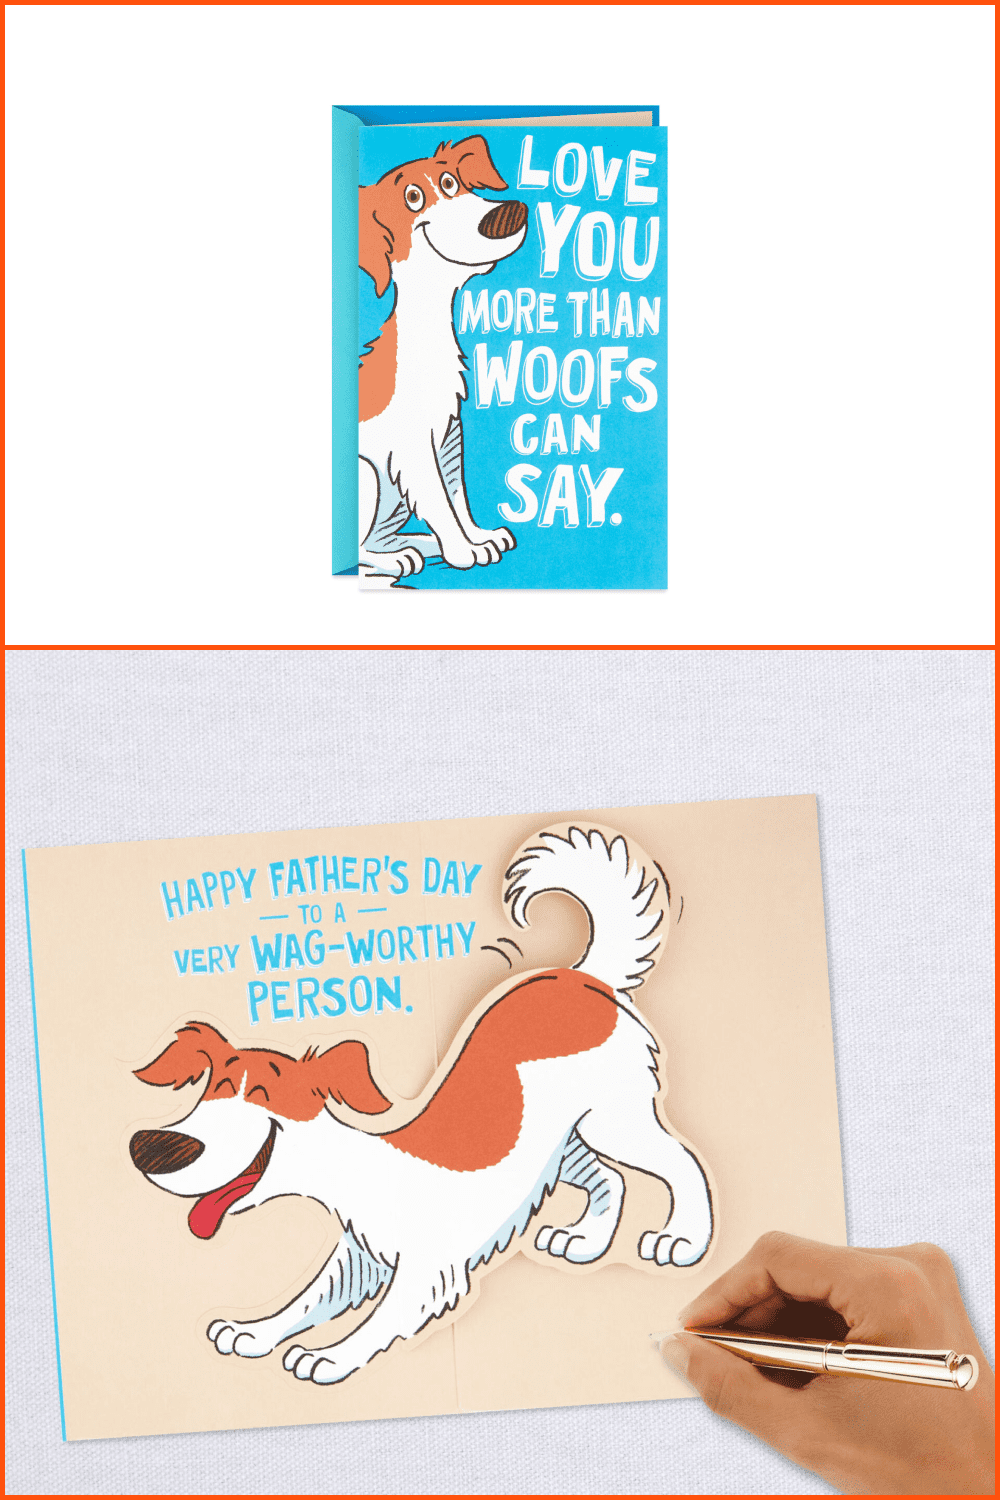 You're Wag-Worthy Funny Pop-Up Father's Day Card From the Dog.